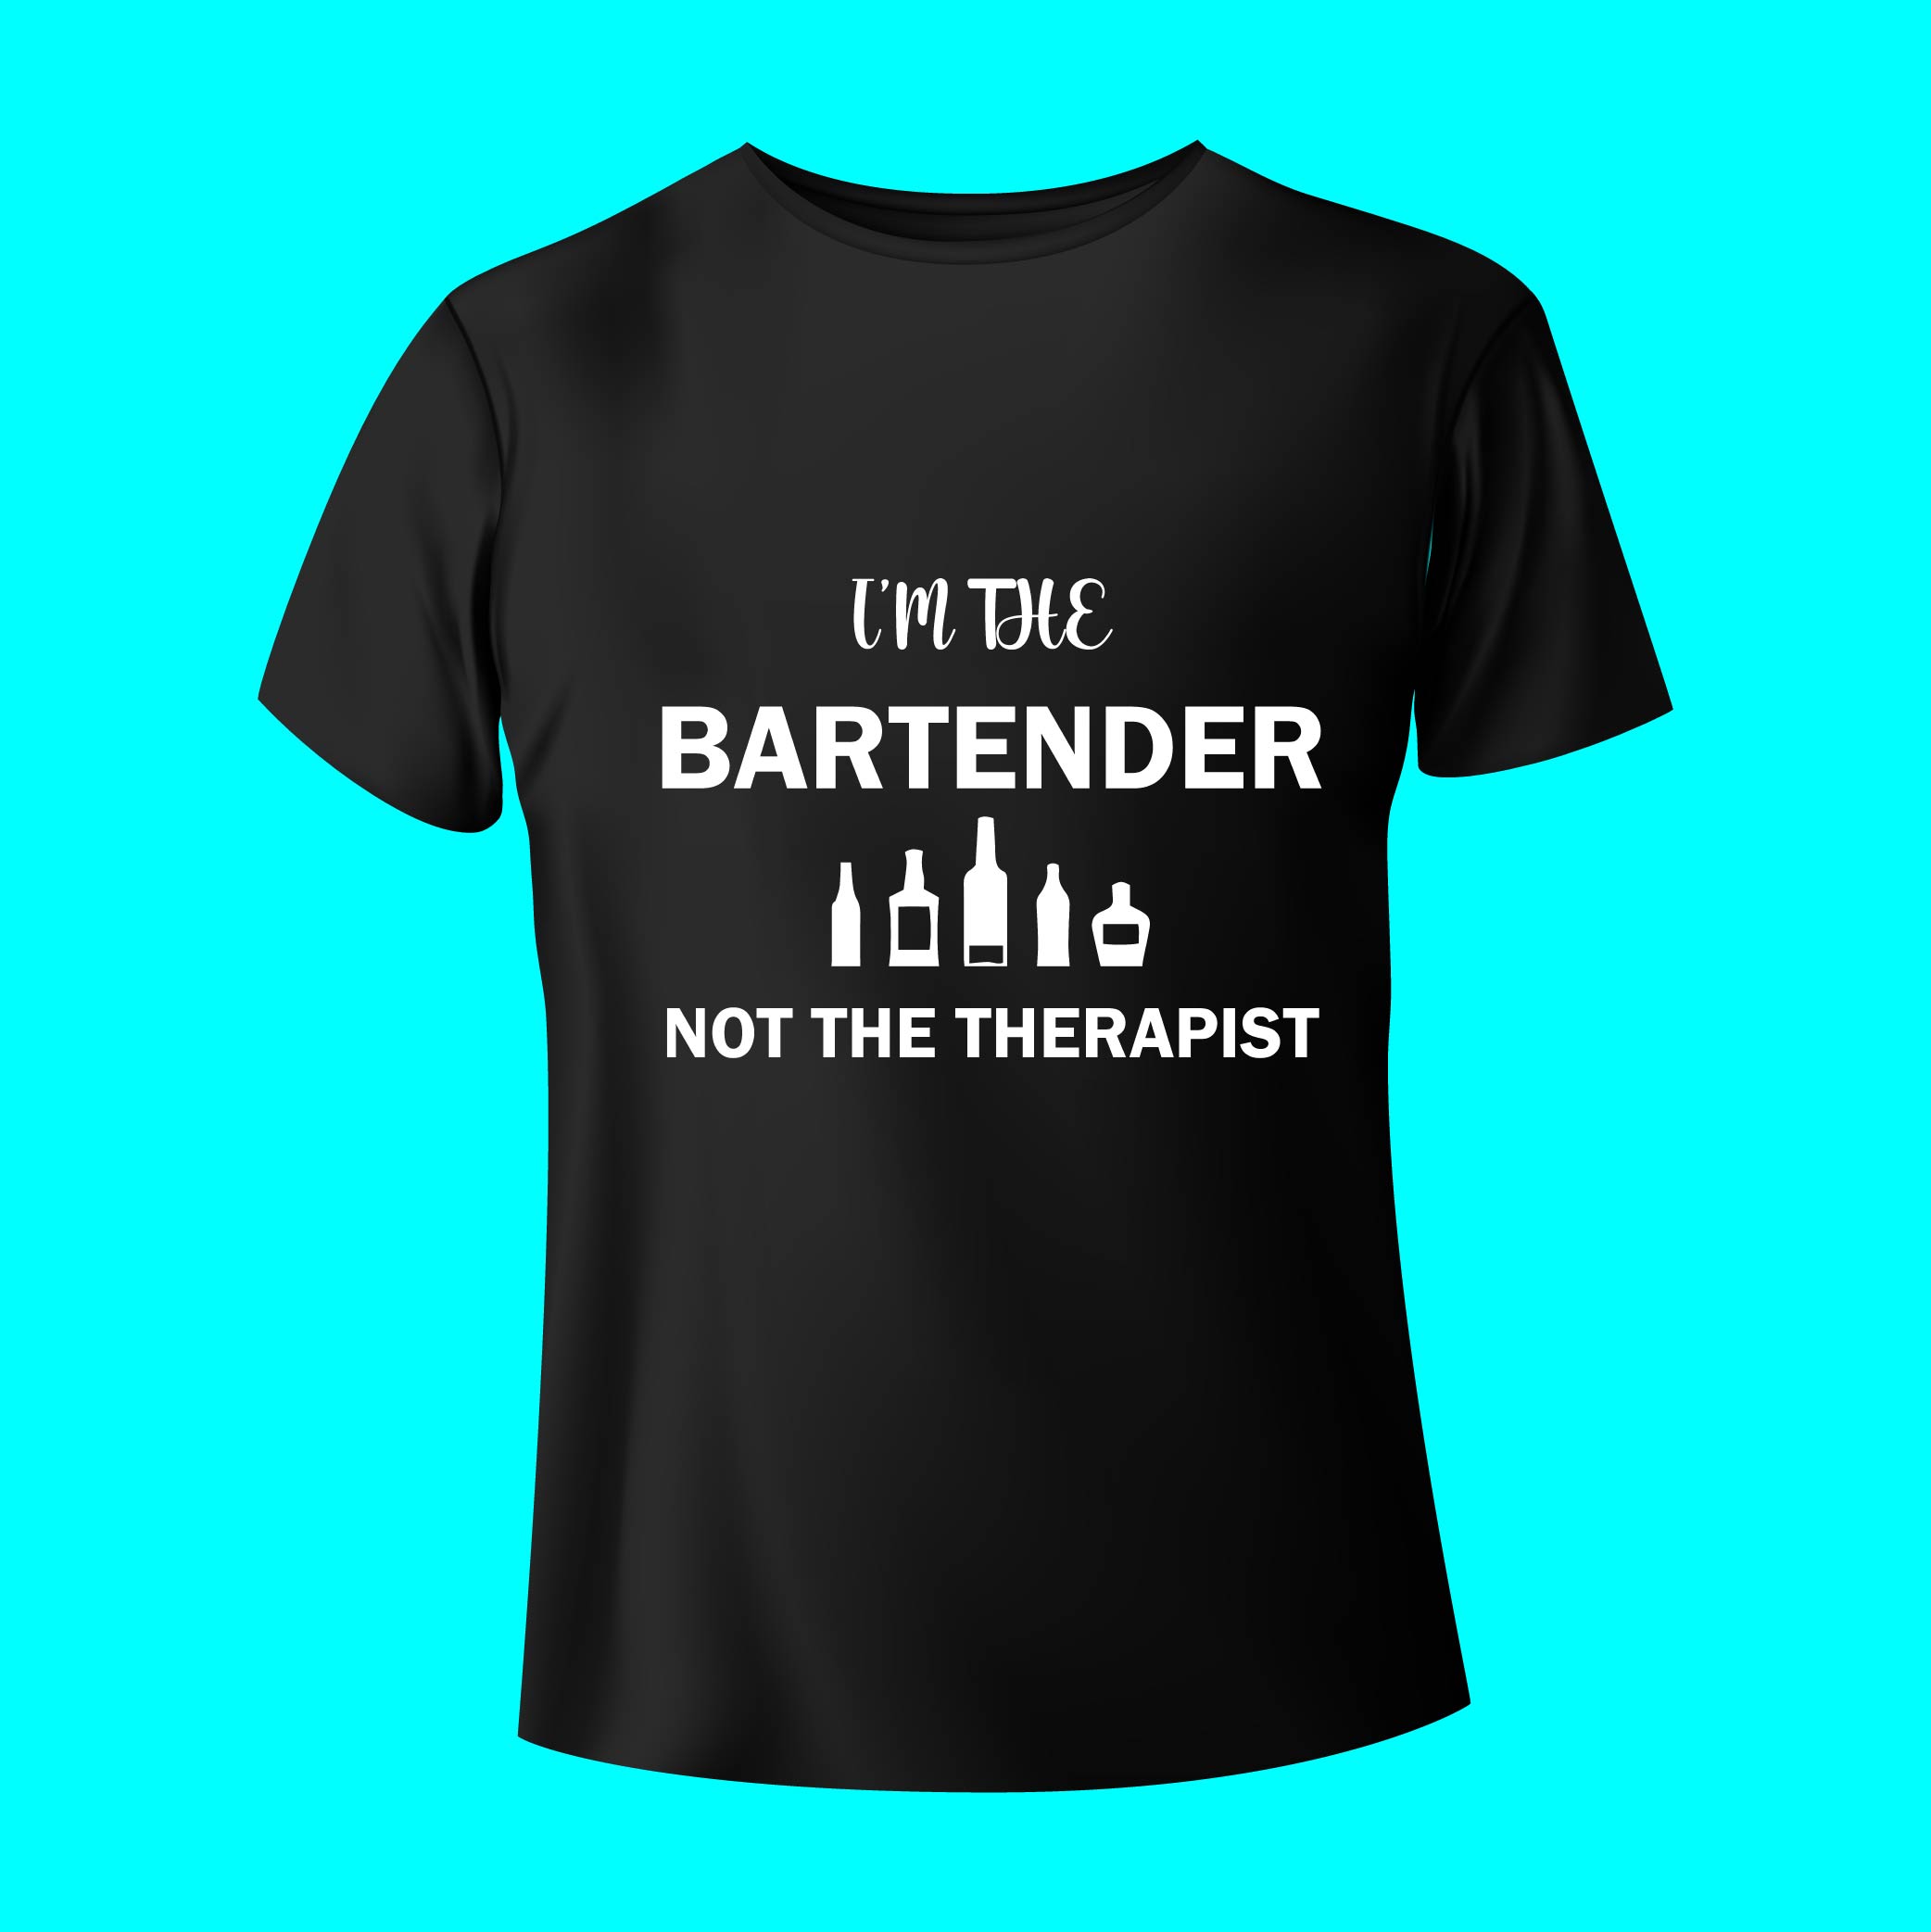 Black t - shirt that says i'm the bartender not the therapist.